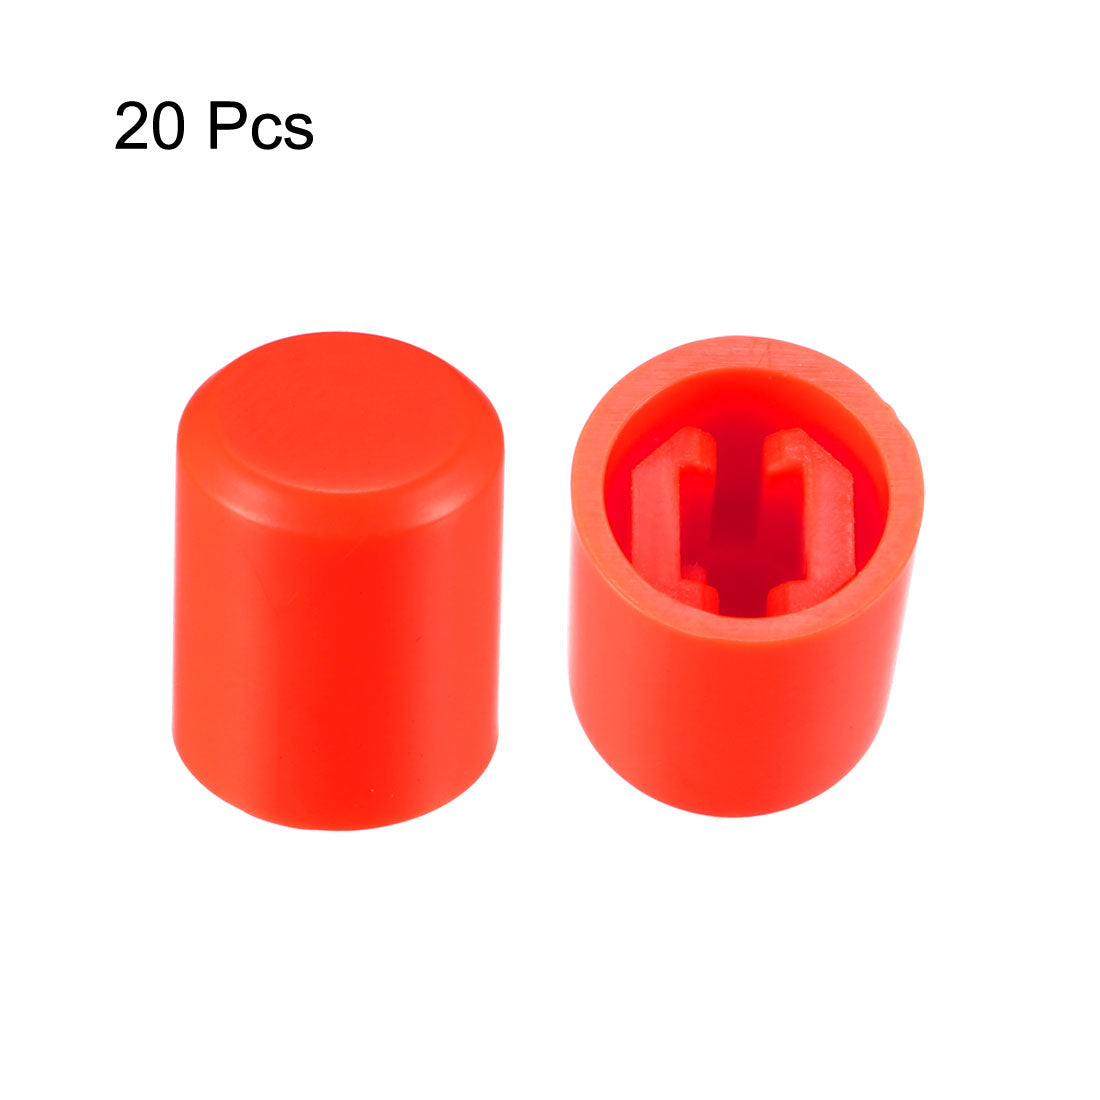 uxcell Uxcell 20Pcs 3.1mm Hole Dia Plastic Push Button Tactile Switch Caps Cover Keycaps Protector Red for 6x6 Micro Switch